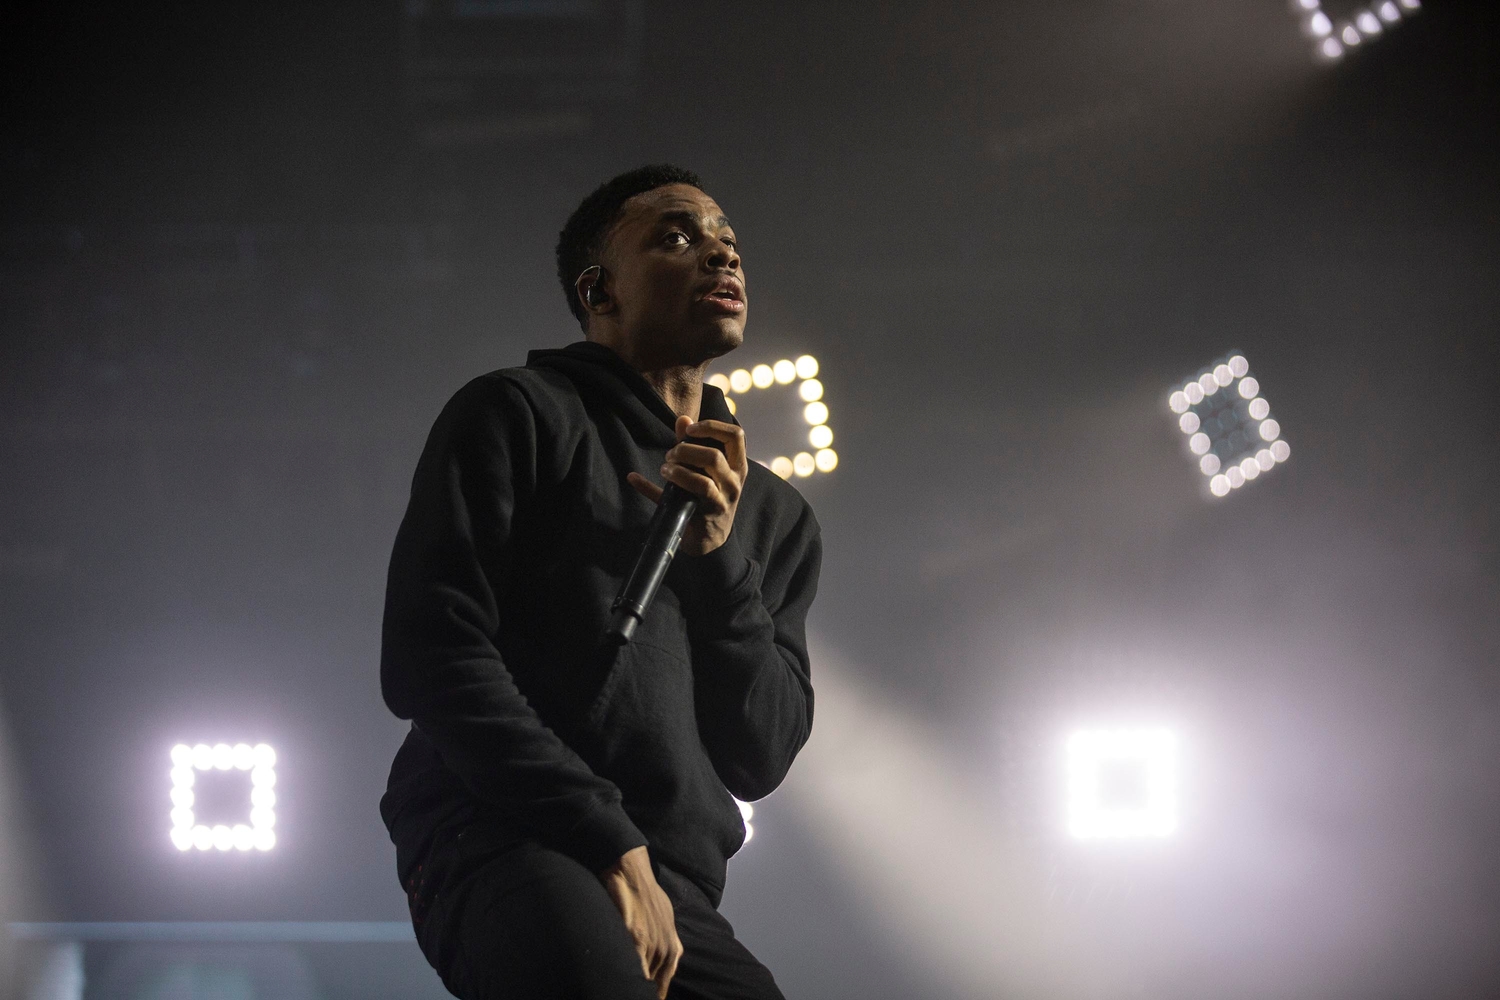 Vince Staples to release new album tonight